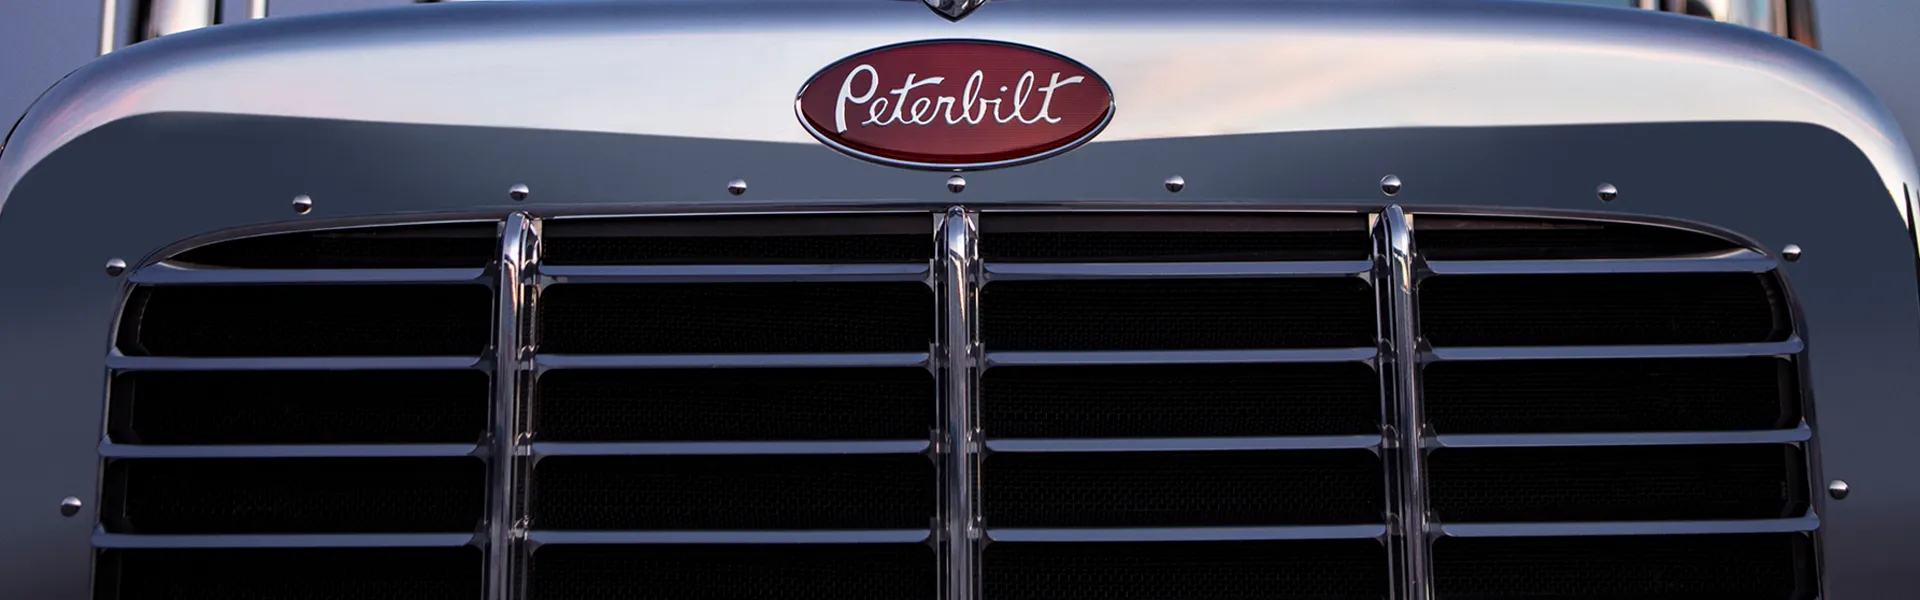 Banner Background - In 2006, the famous Peterbilt Model 389 proudly took its role as the torch bearer for Peterbilt’s iconic legacy of power, capability, luxury and style. Known as one of the most powerful tractors on the road, Model 389 amassed a community of devoted fans and admirers like no other truck before it. More than 100,000 Model 389 trucks were manufactured during its 18-year production run. Today, the truck still maintains its influential presence in the trucking world and beyond.